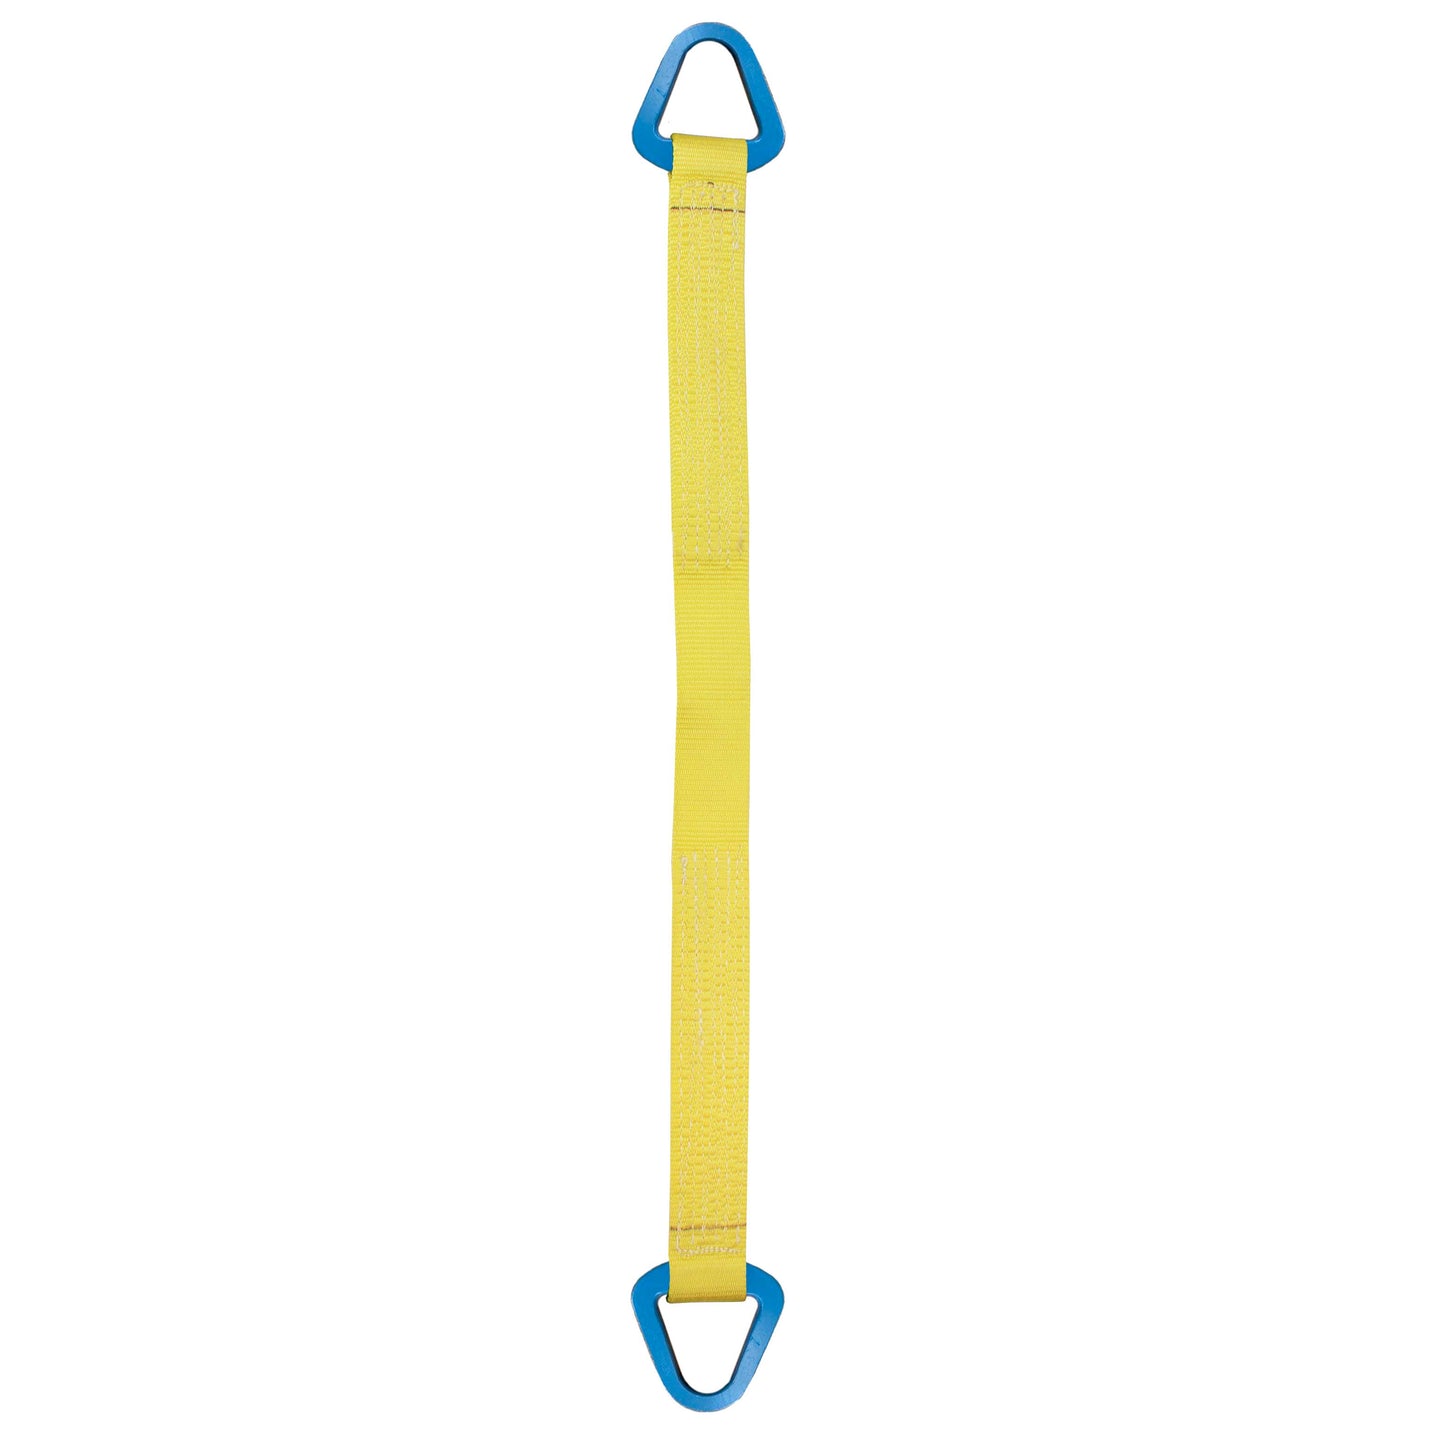 Nylon Lifting Sling Triangle 3 inch x 3 foot 1ply image 1 of 2